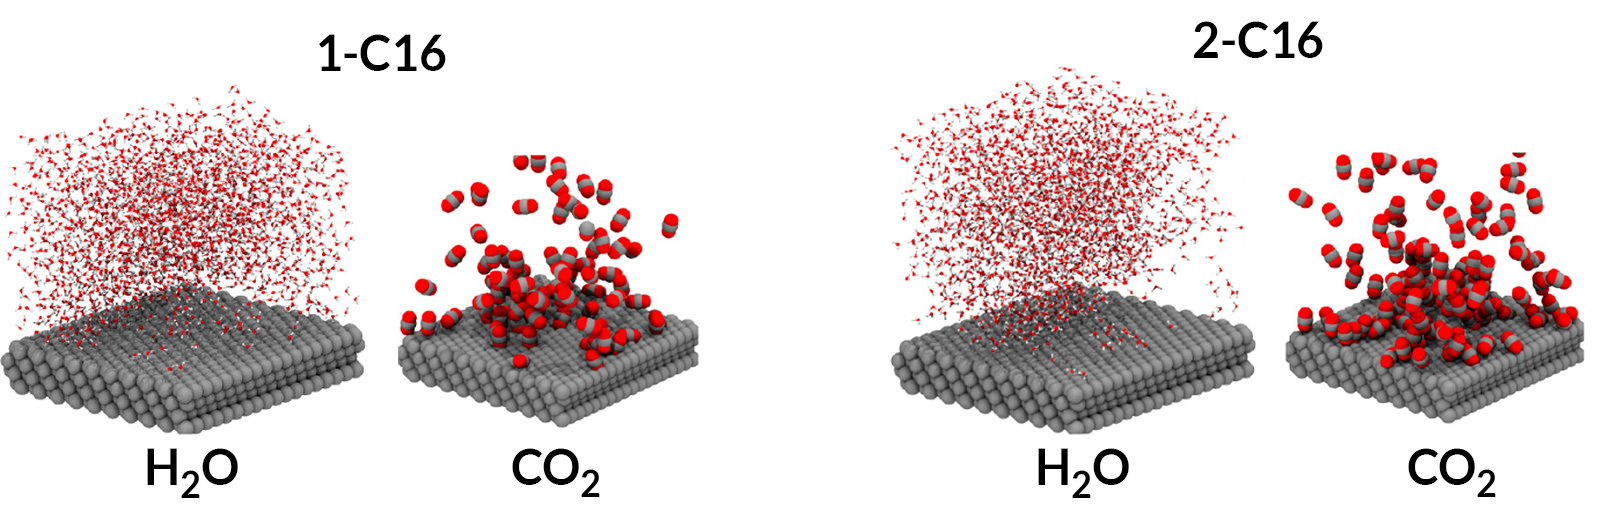 Distribution of water and carbon dioxide molecules over silver for 1-C16 and 2-C16.